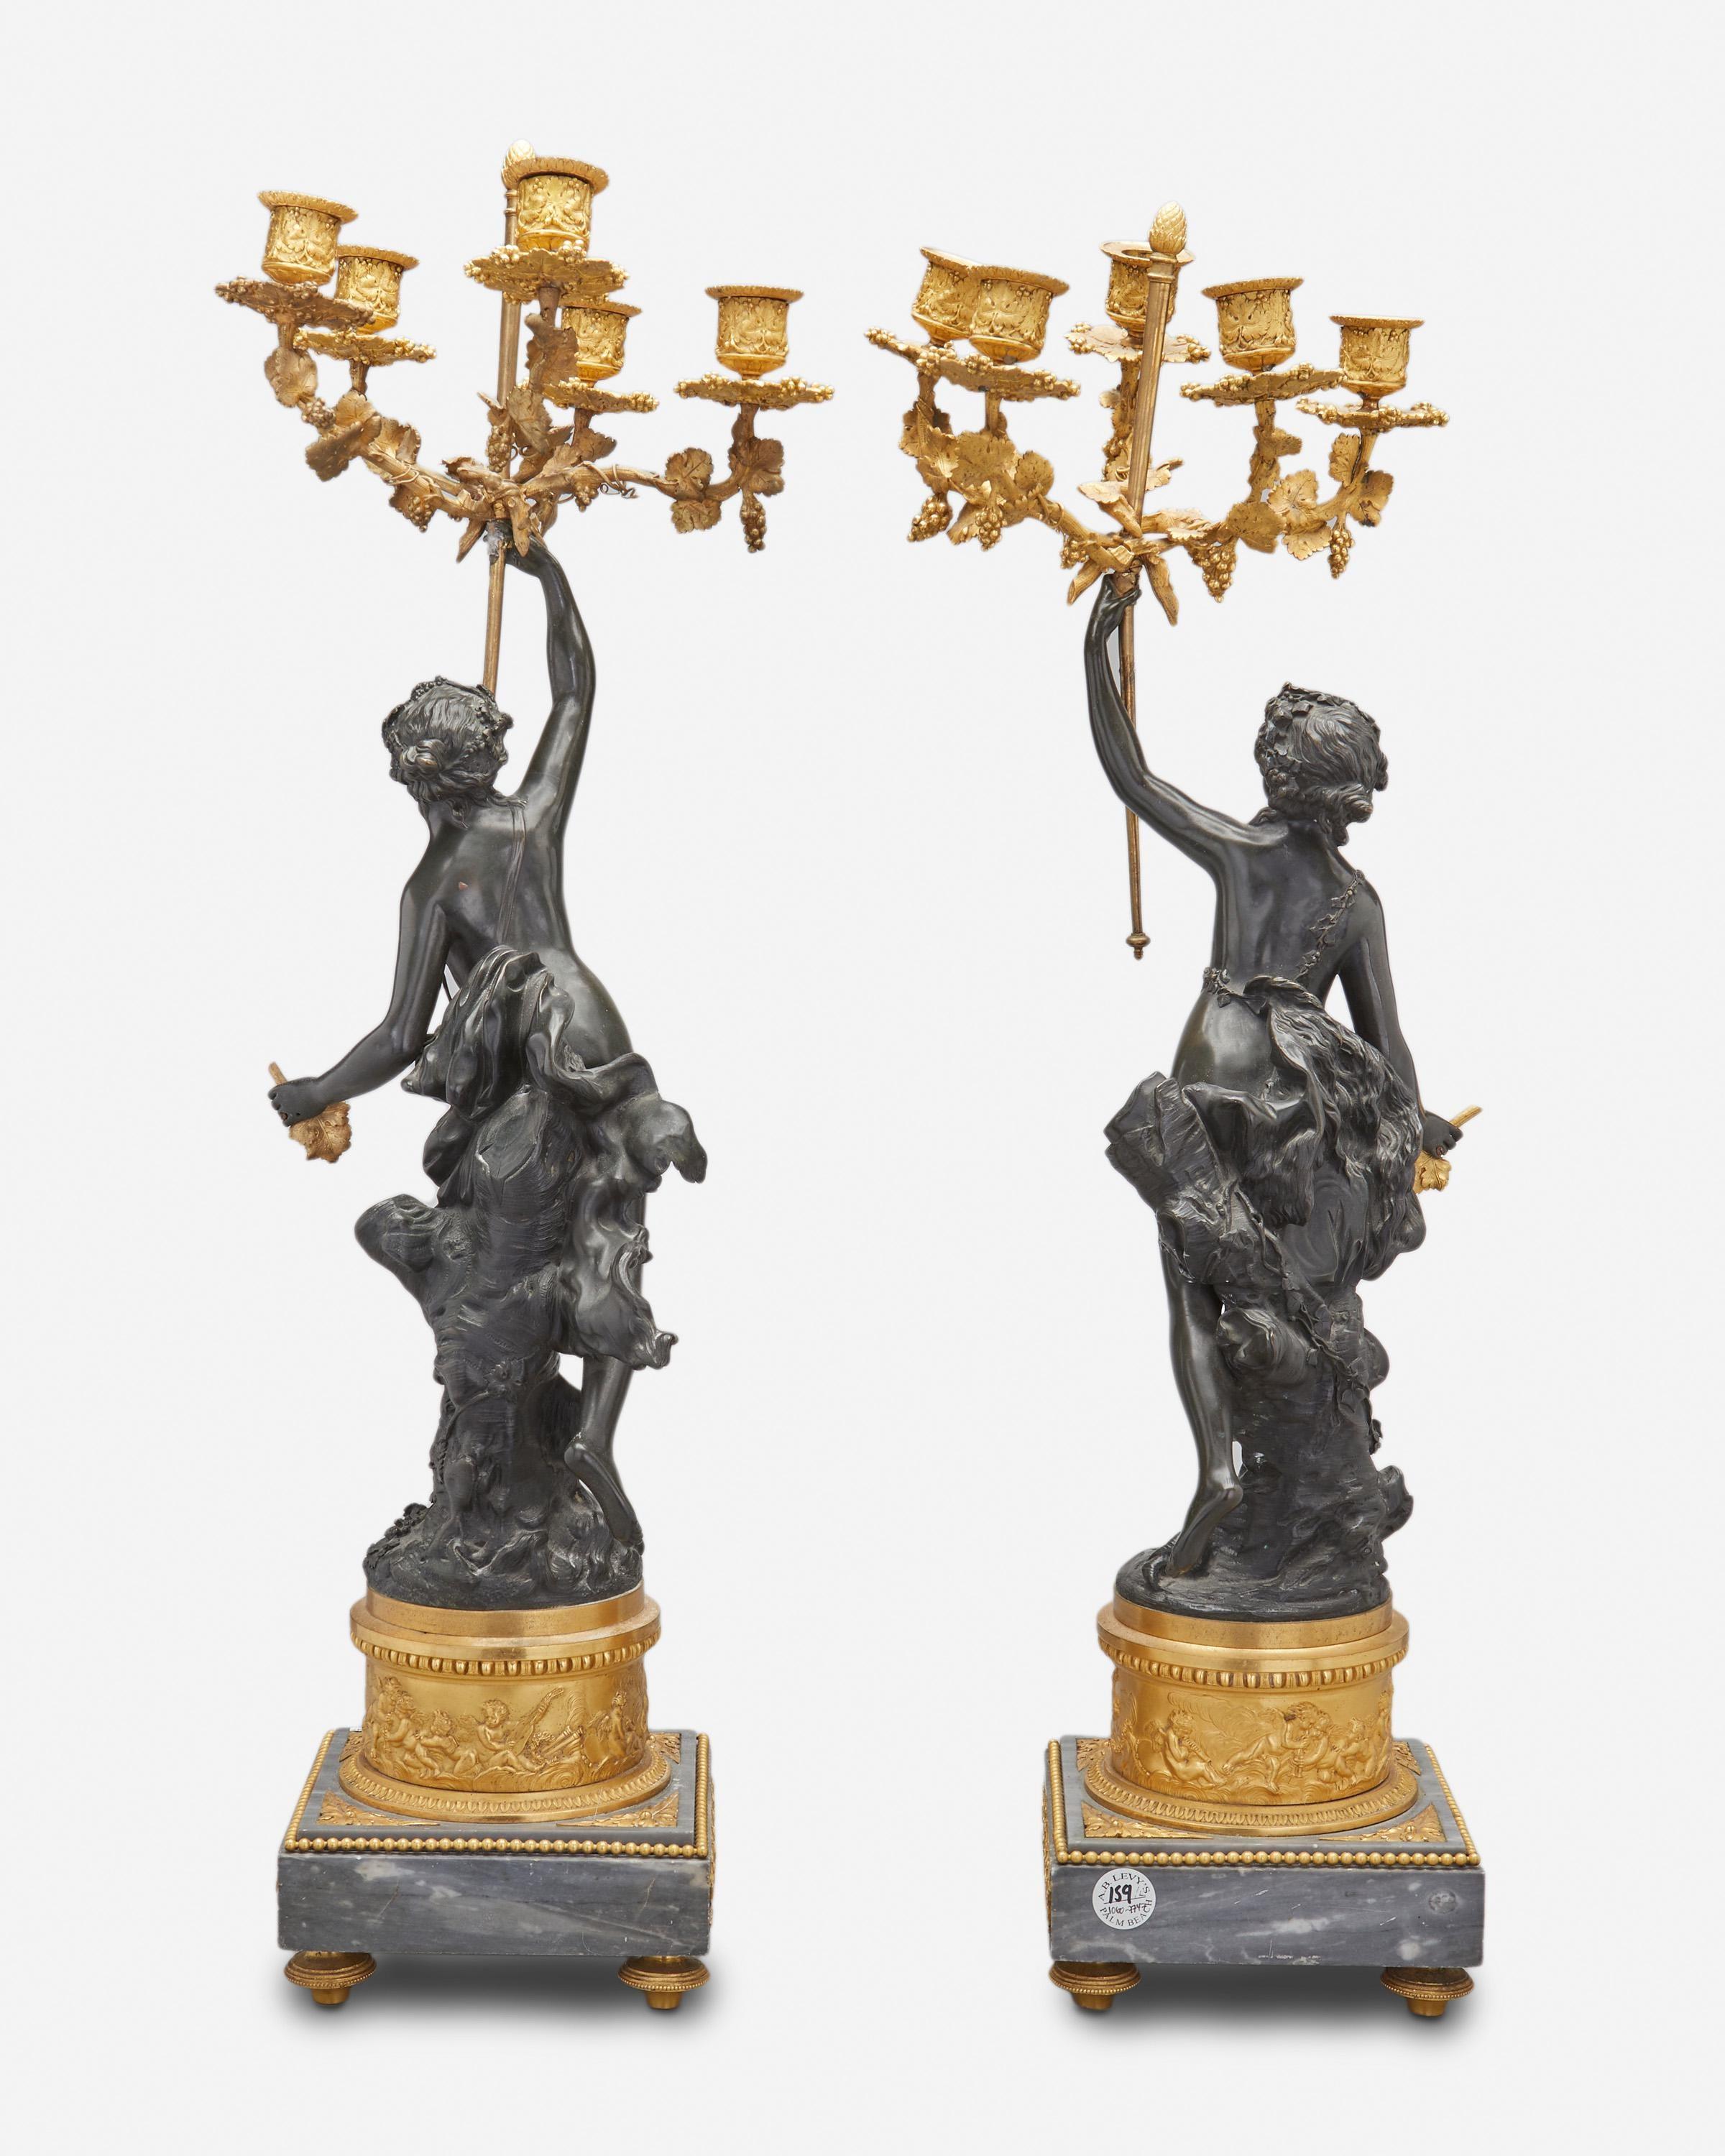 19th century pair of fine French candelabrum
 Each candelabrum in the form of a patinated bronze Bacchante holding aloft a gilt-bronze standard issuing five grapevine candle arms atop a gilt-bronze pedestal with a bas-relief putti frieze and raised